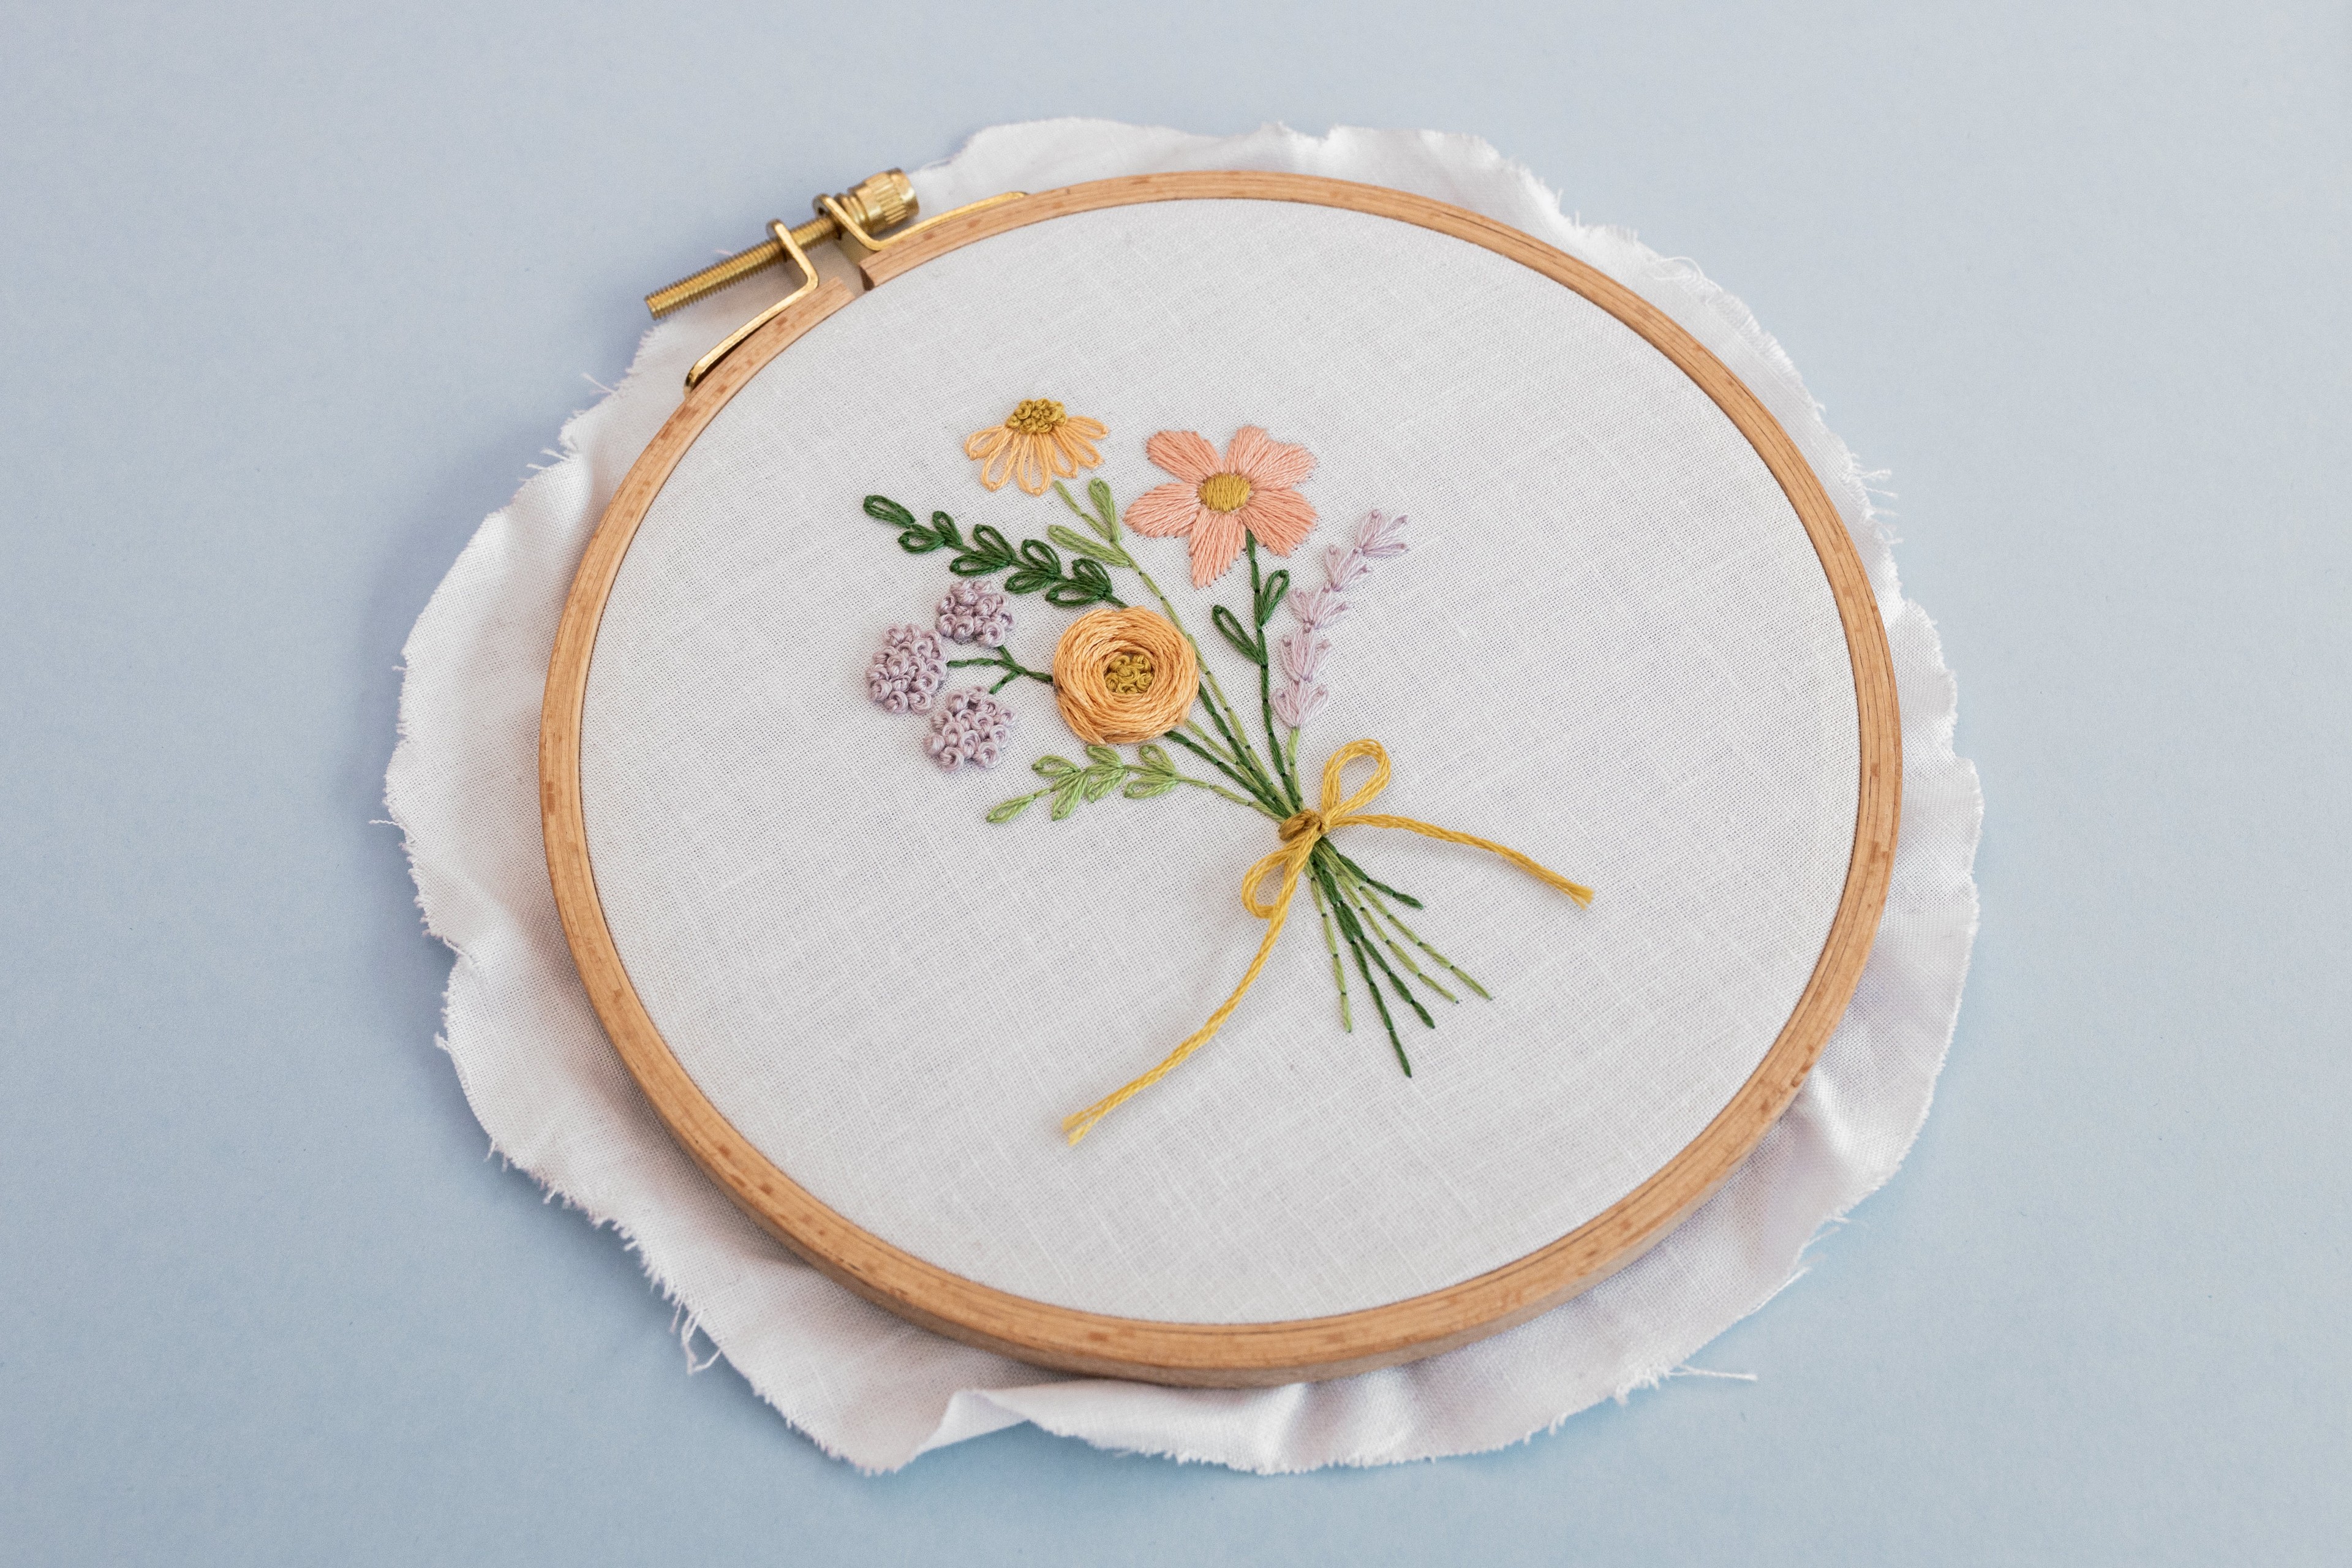 A floral pattern lies in a modern embroidery hoop with good tension.